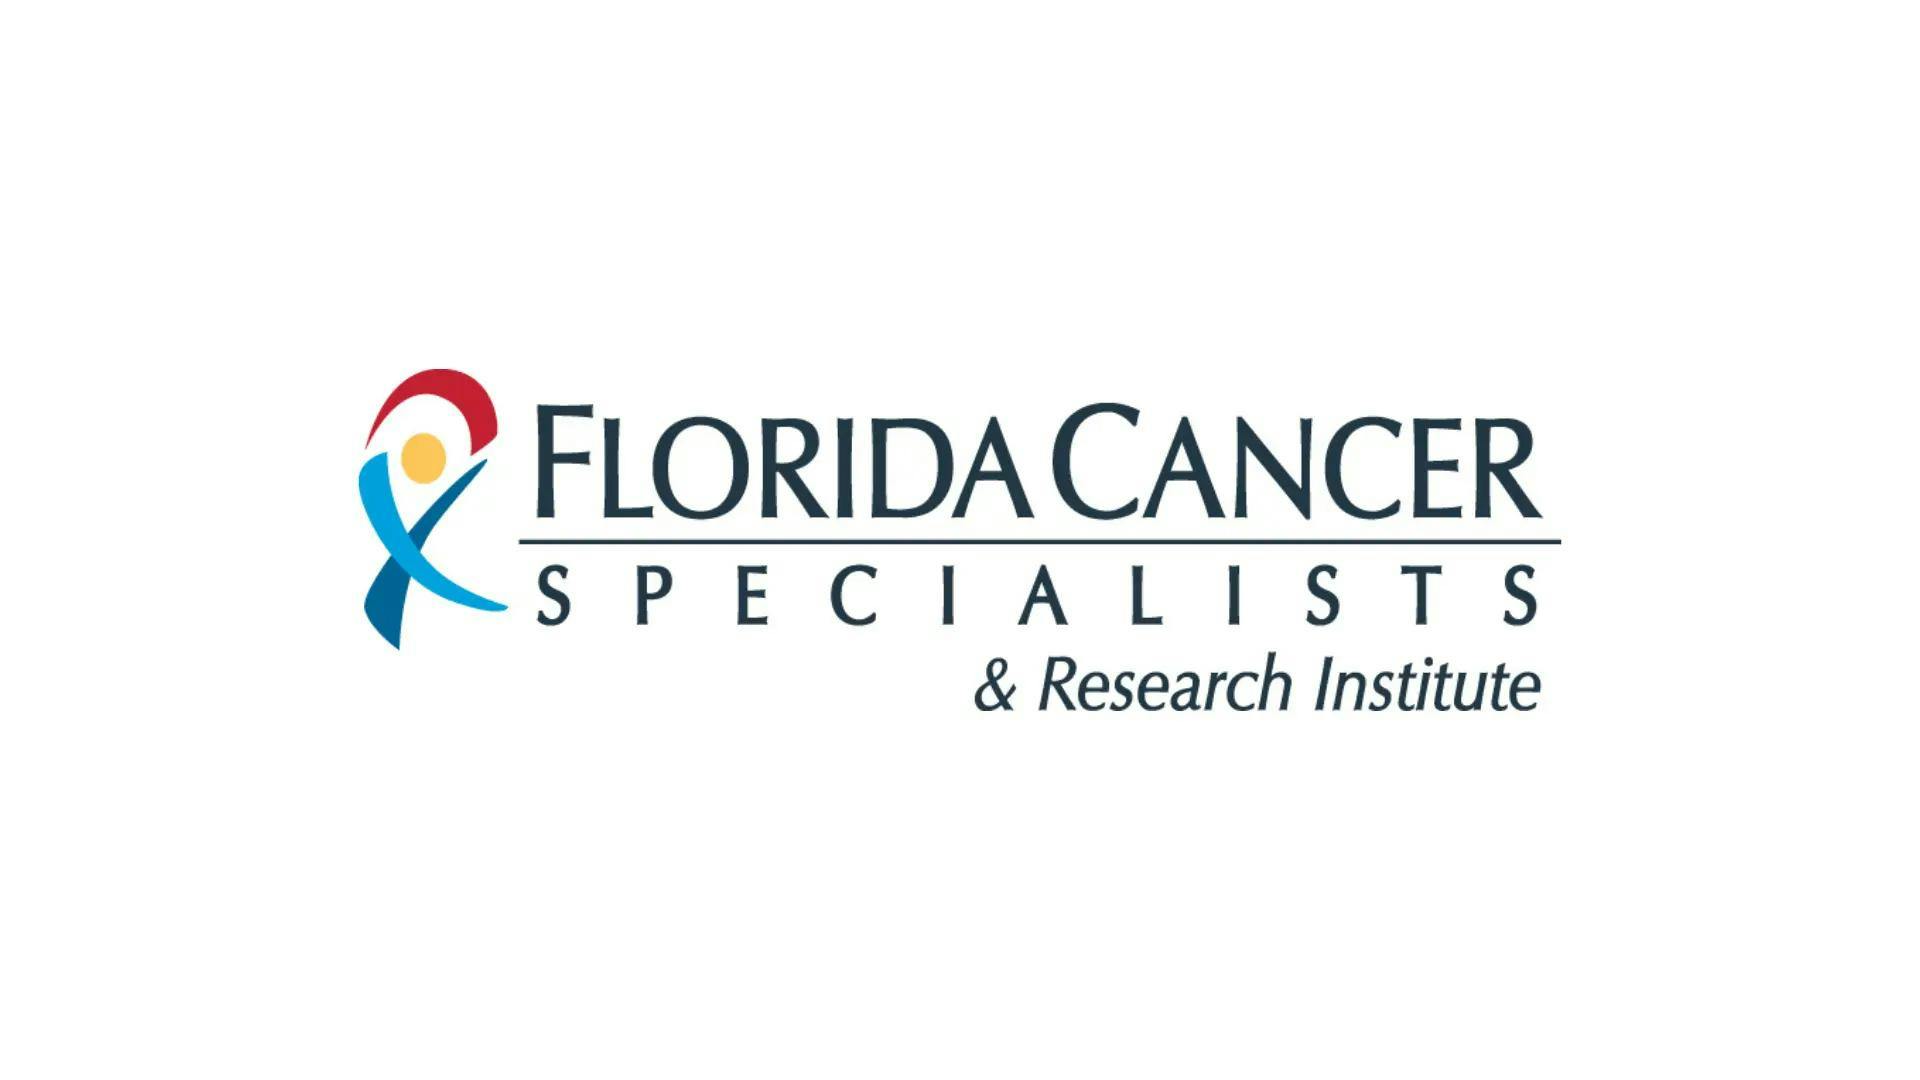 Florida Cancer Specialists & Research Institute Announces Executive Leadership Appointment